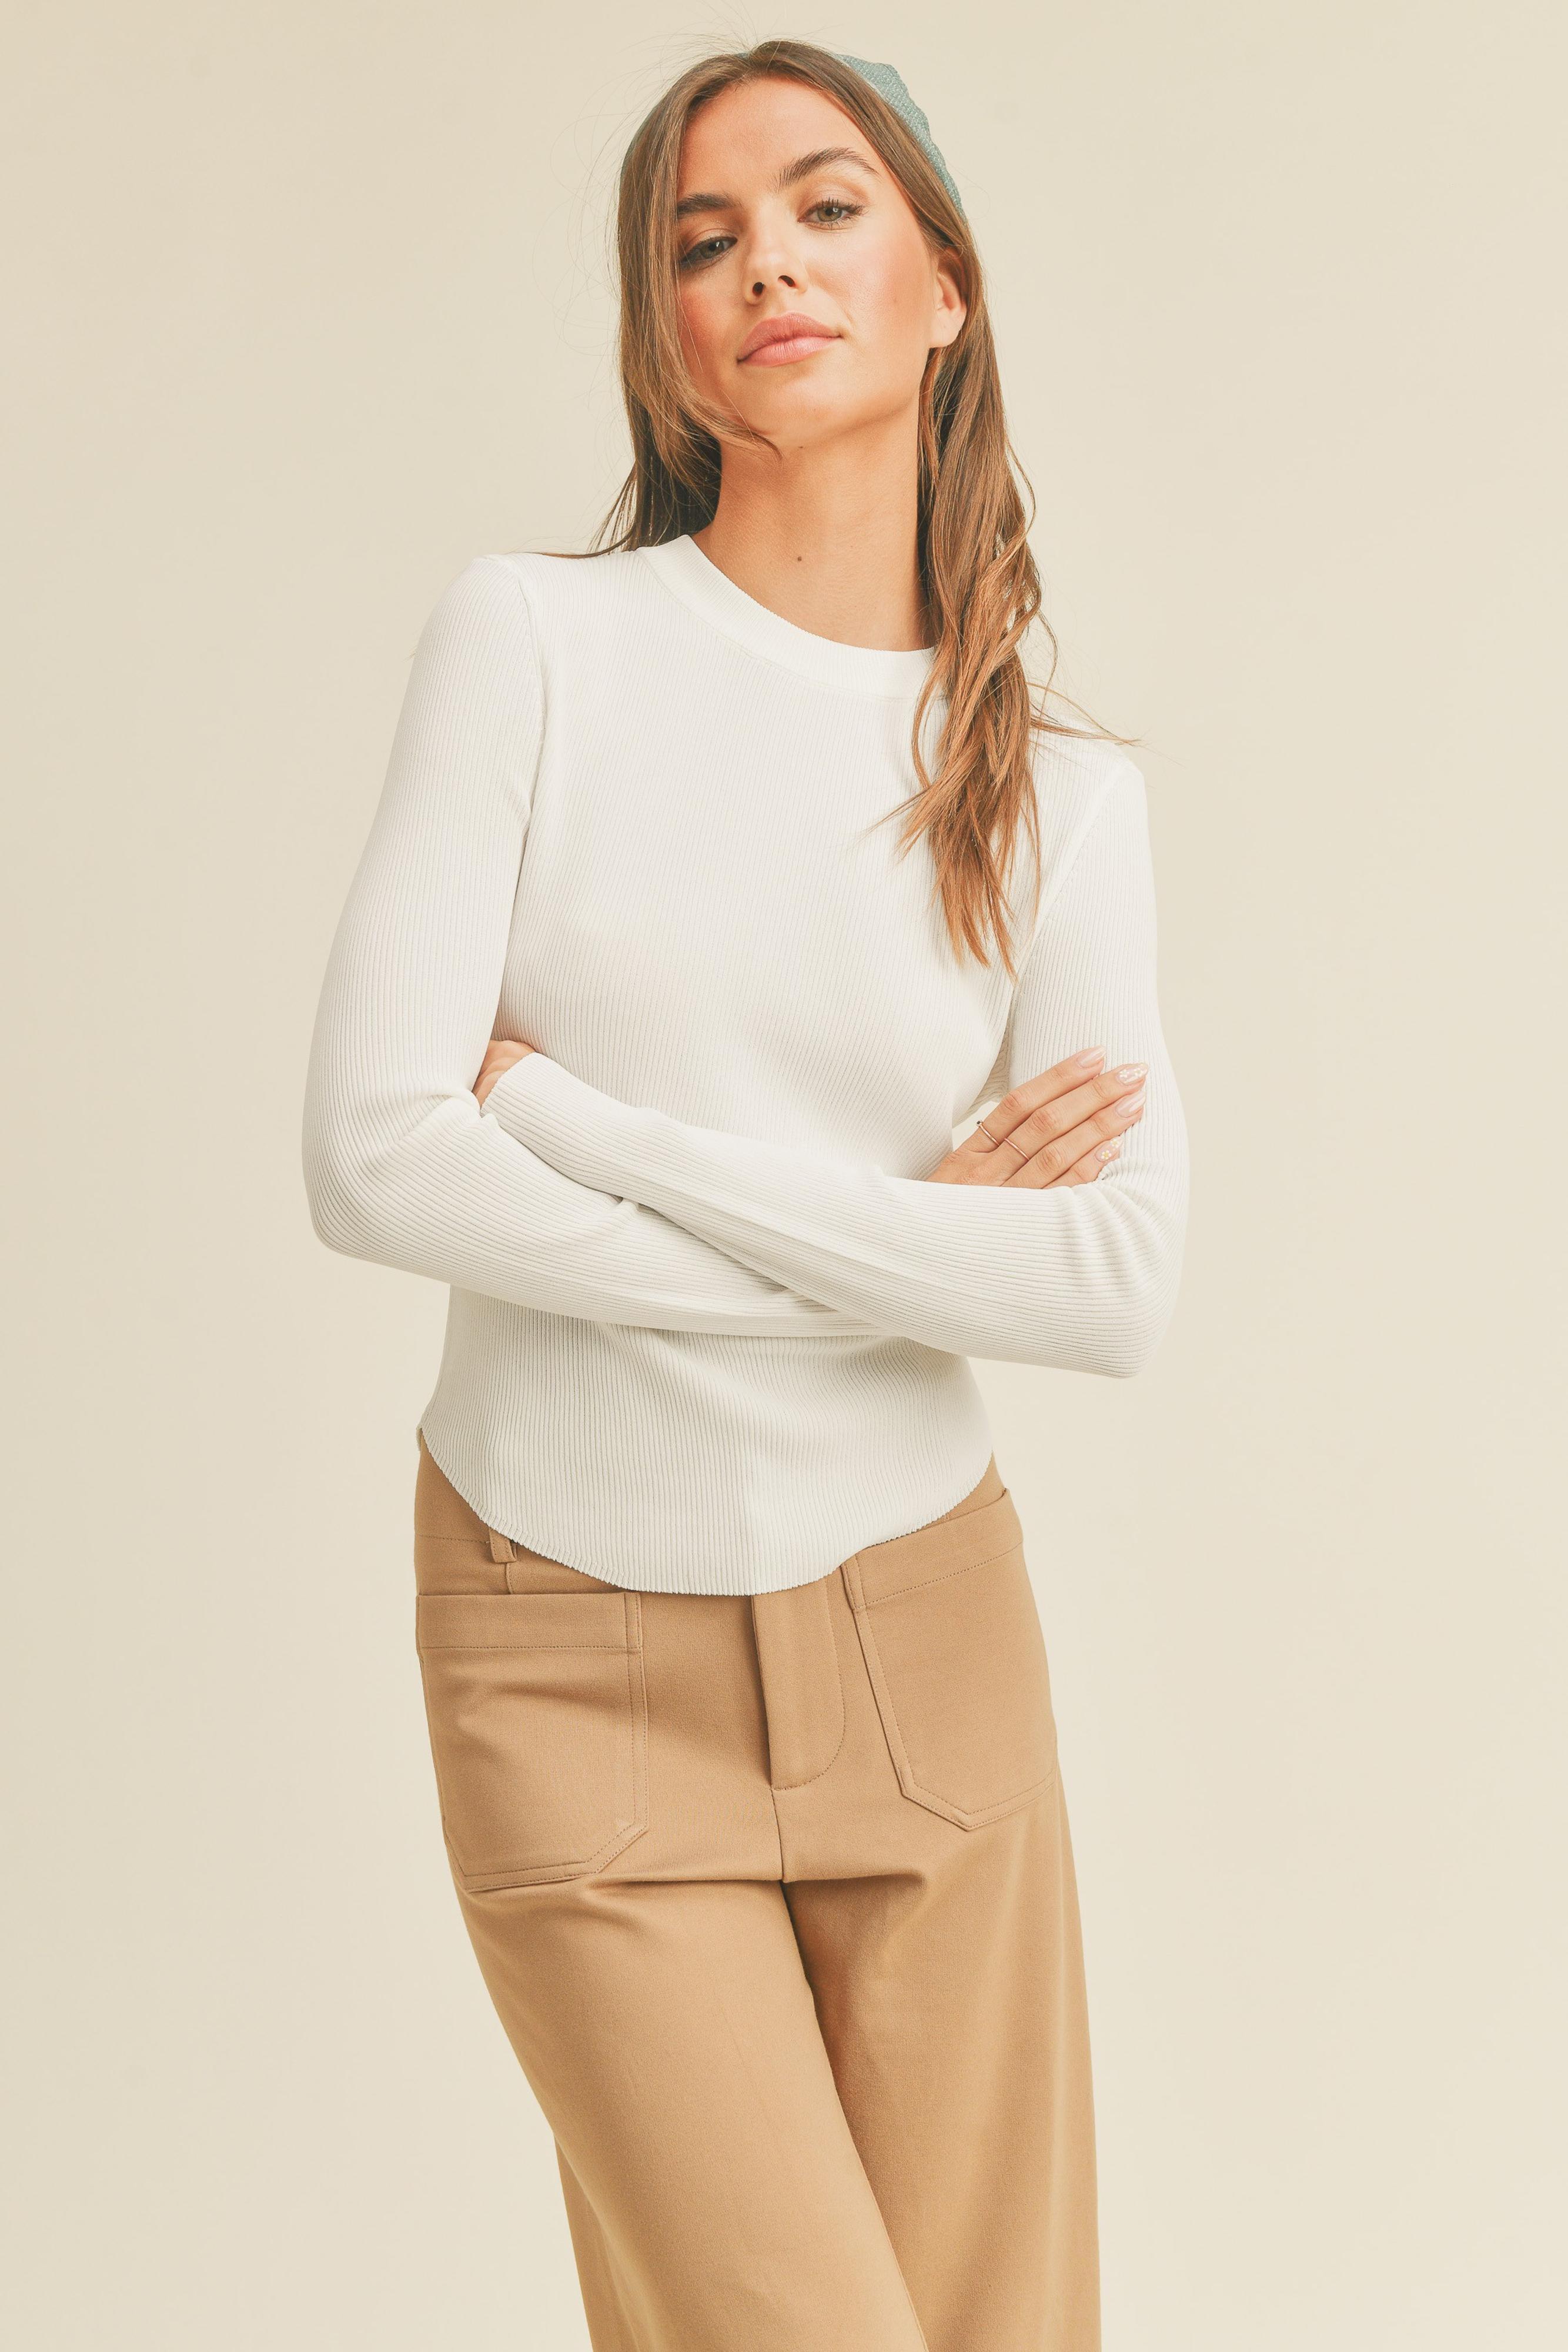  Harbor Breeze Ribbed Long Sleeve Top